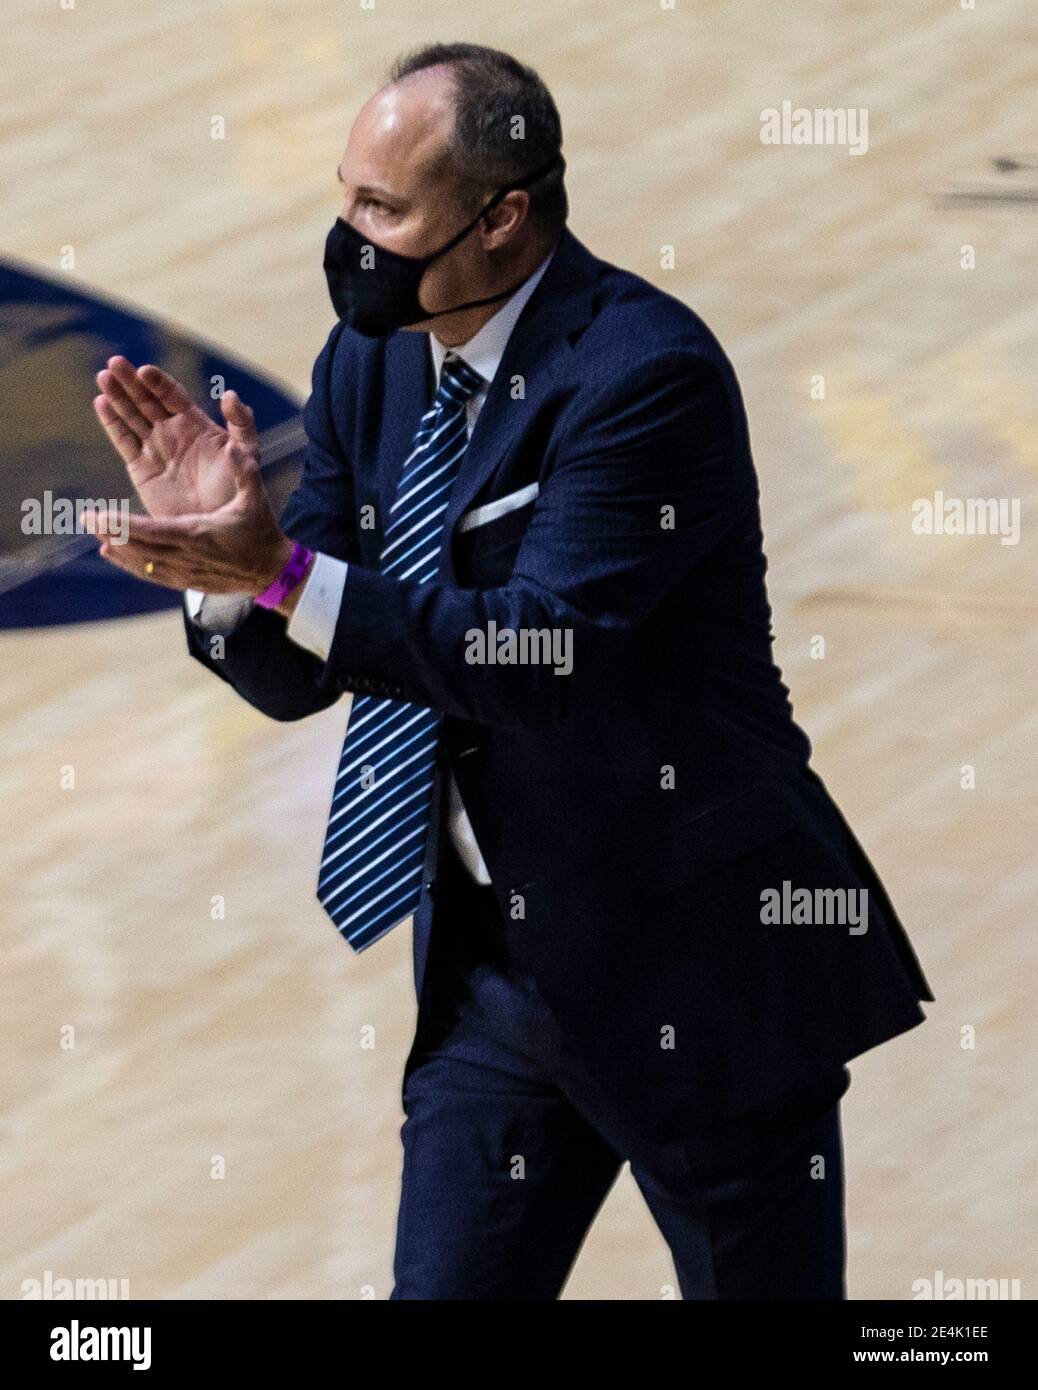 Hass Pavilion. 23rd Jan, 2021. CA U.S.A. California head coach Mark Fox reacts after team scores during the NCAA Basketball game between USC Trojans and the California Golden Bears 68-76 lost at Hass Pavilion. Thurman James/CSM/Alamy Live News Stock Photo